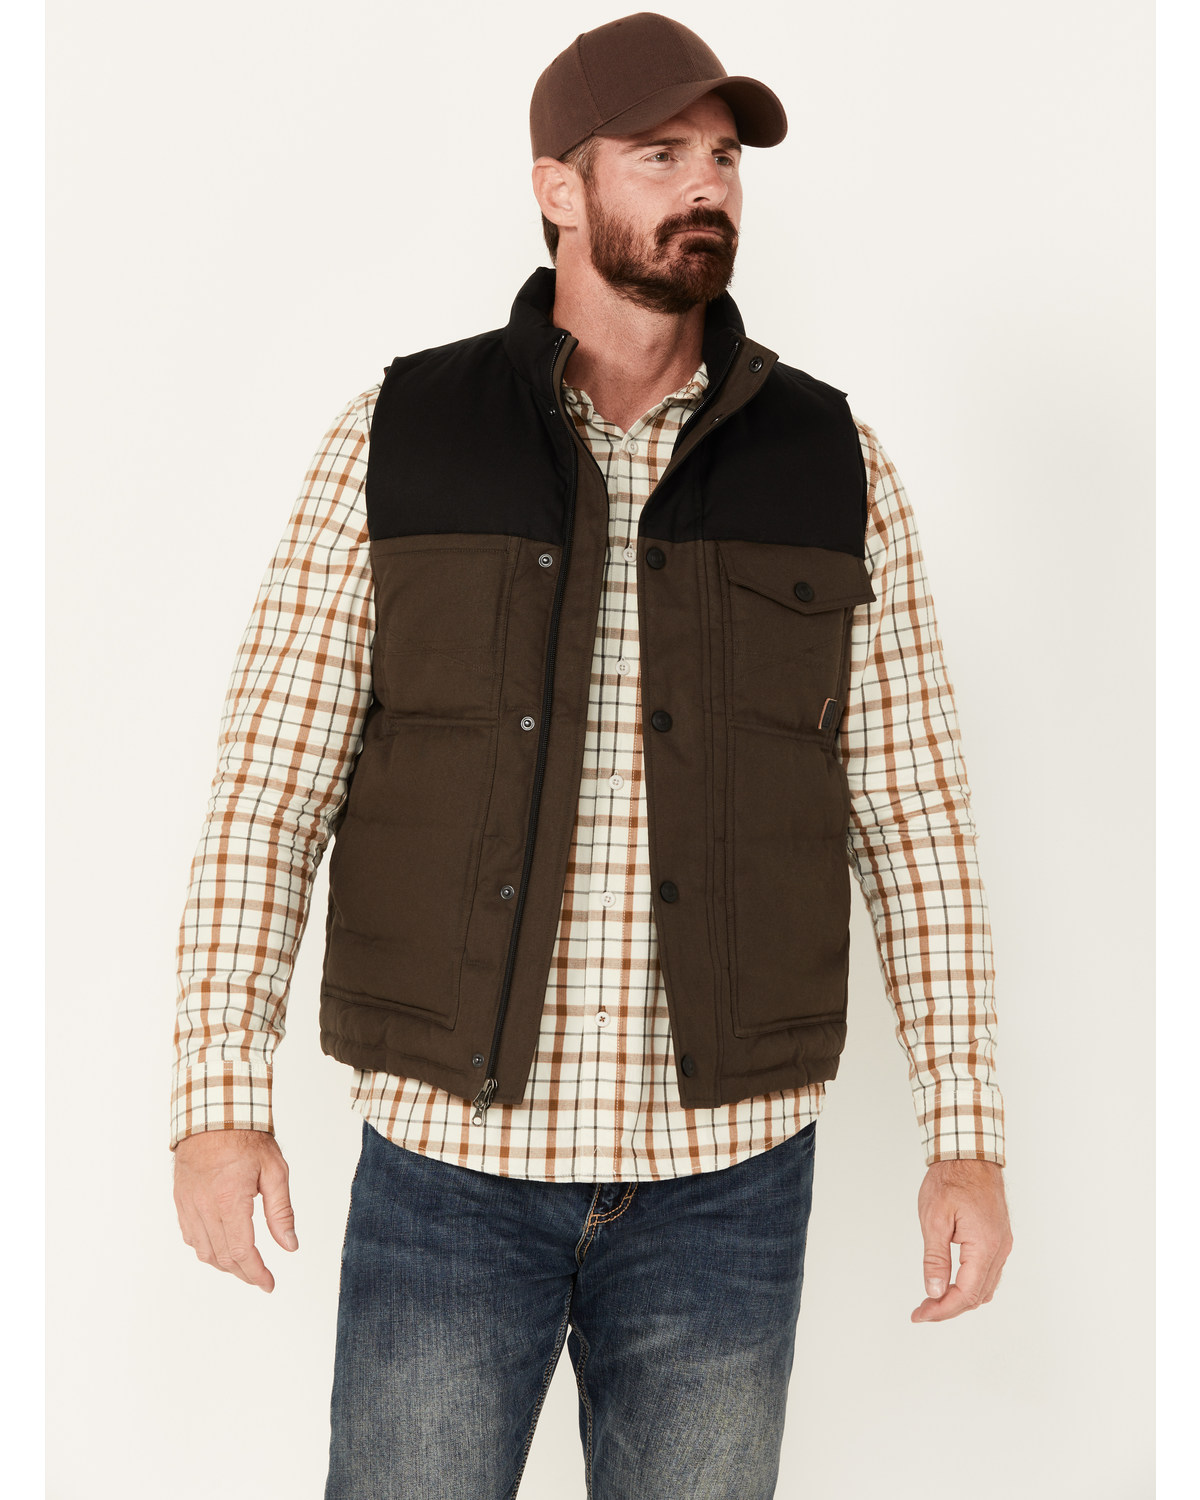 Brothers and Sons Men's Utility Puffer Vest